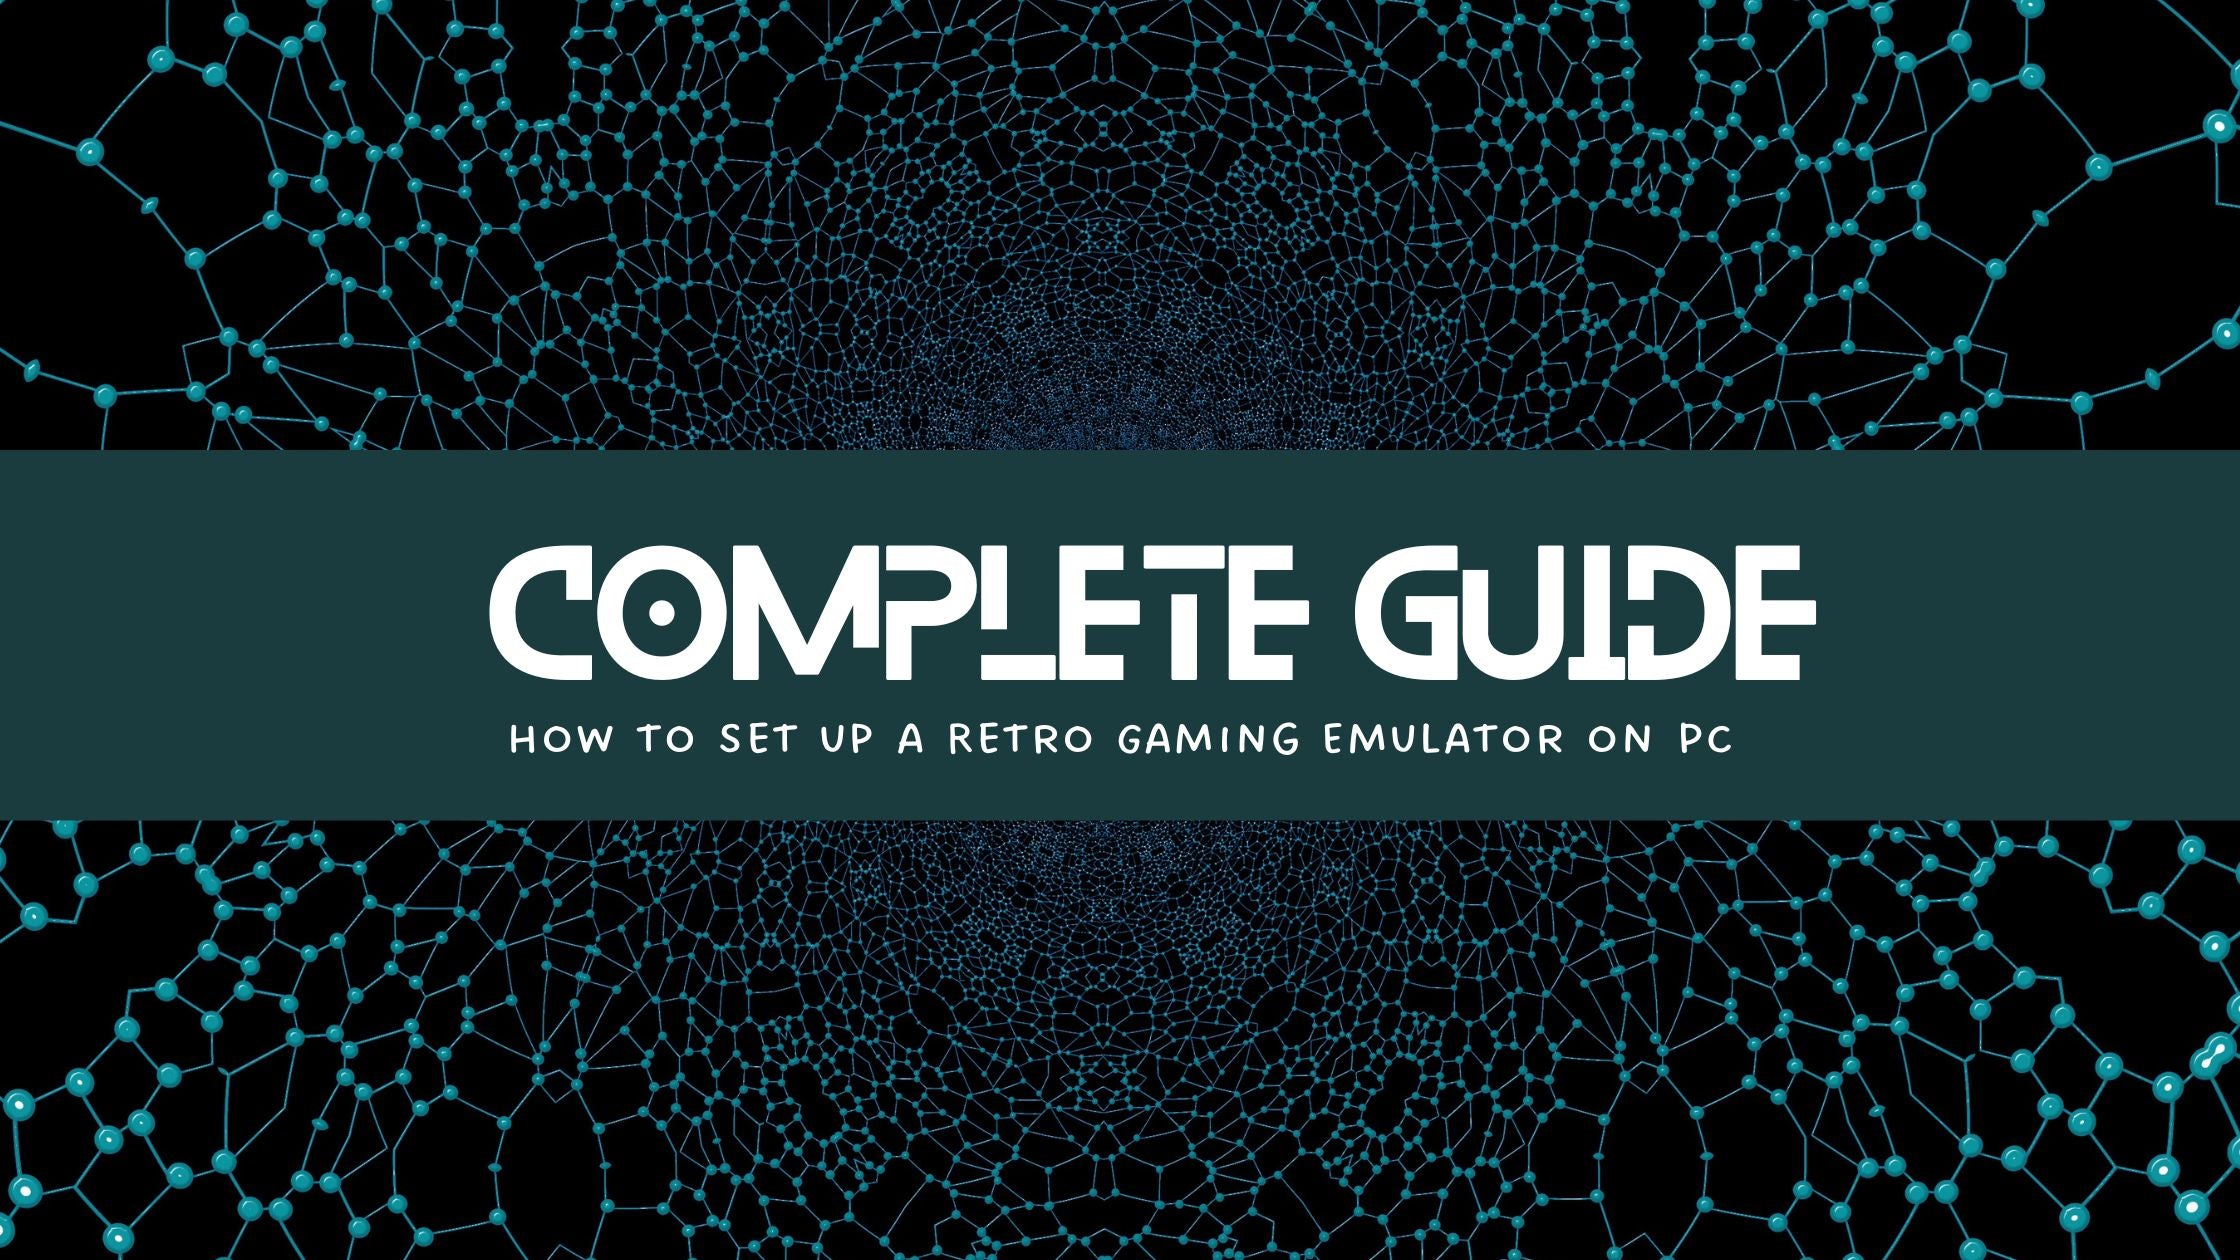 How to Set up a Retro Gaming Emulator on PC: A Complete Guide